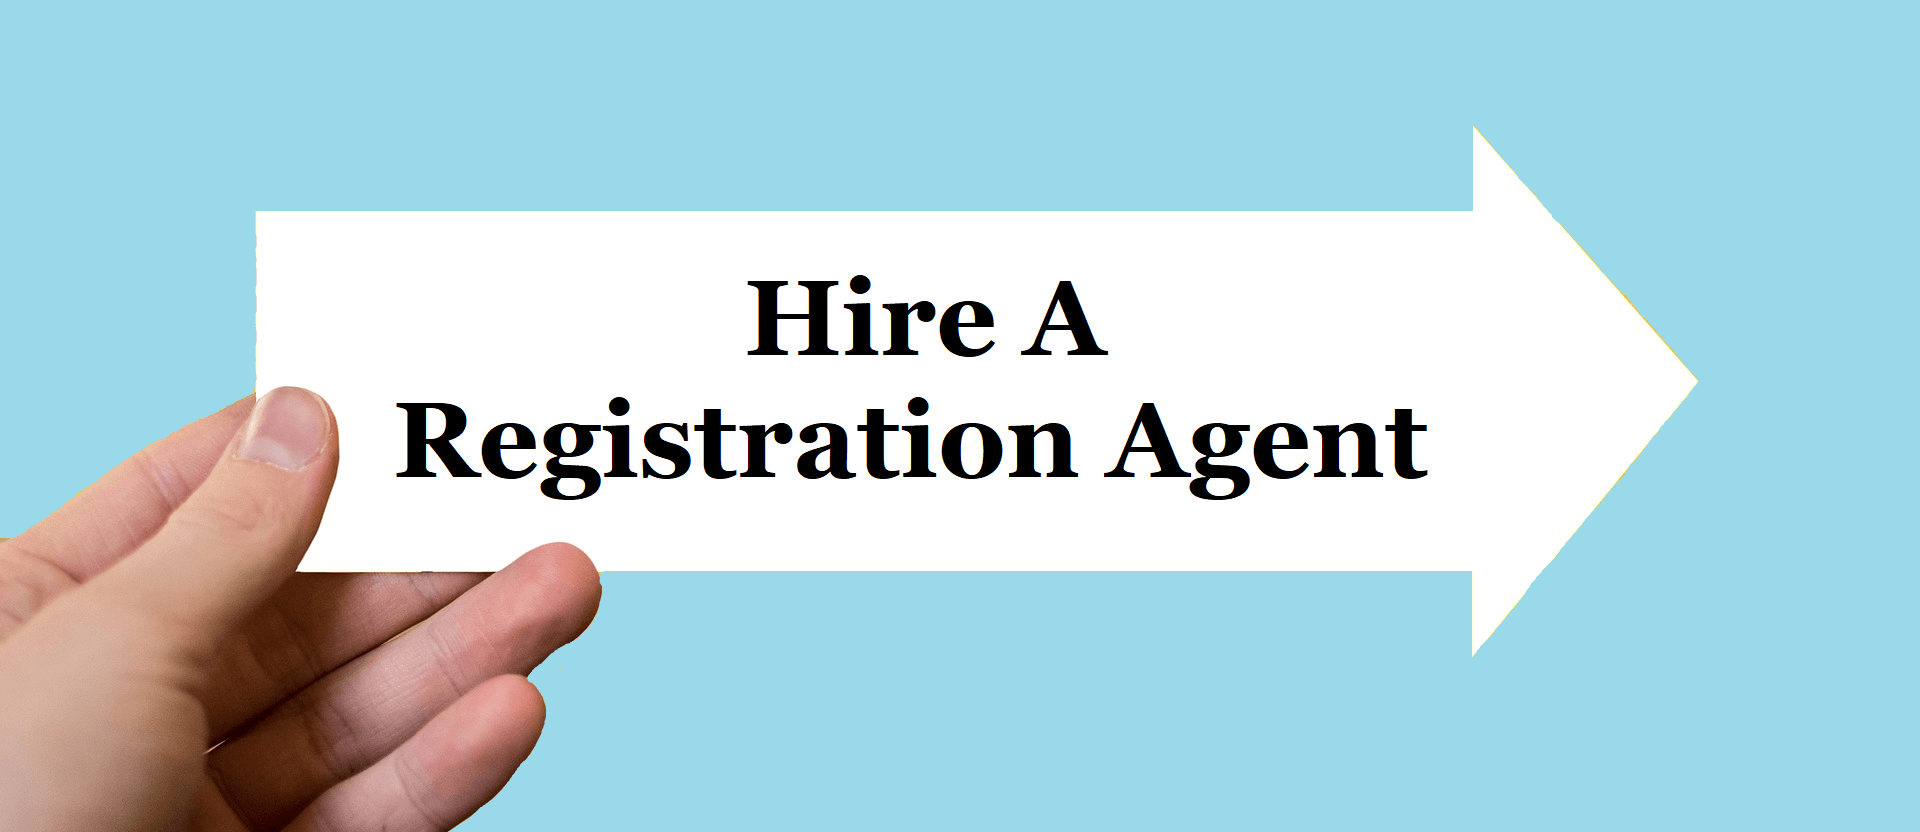 Hire a registration agent for your business setup in dubai